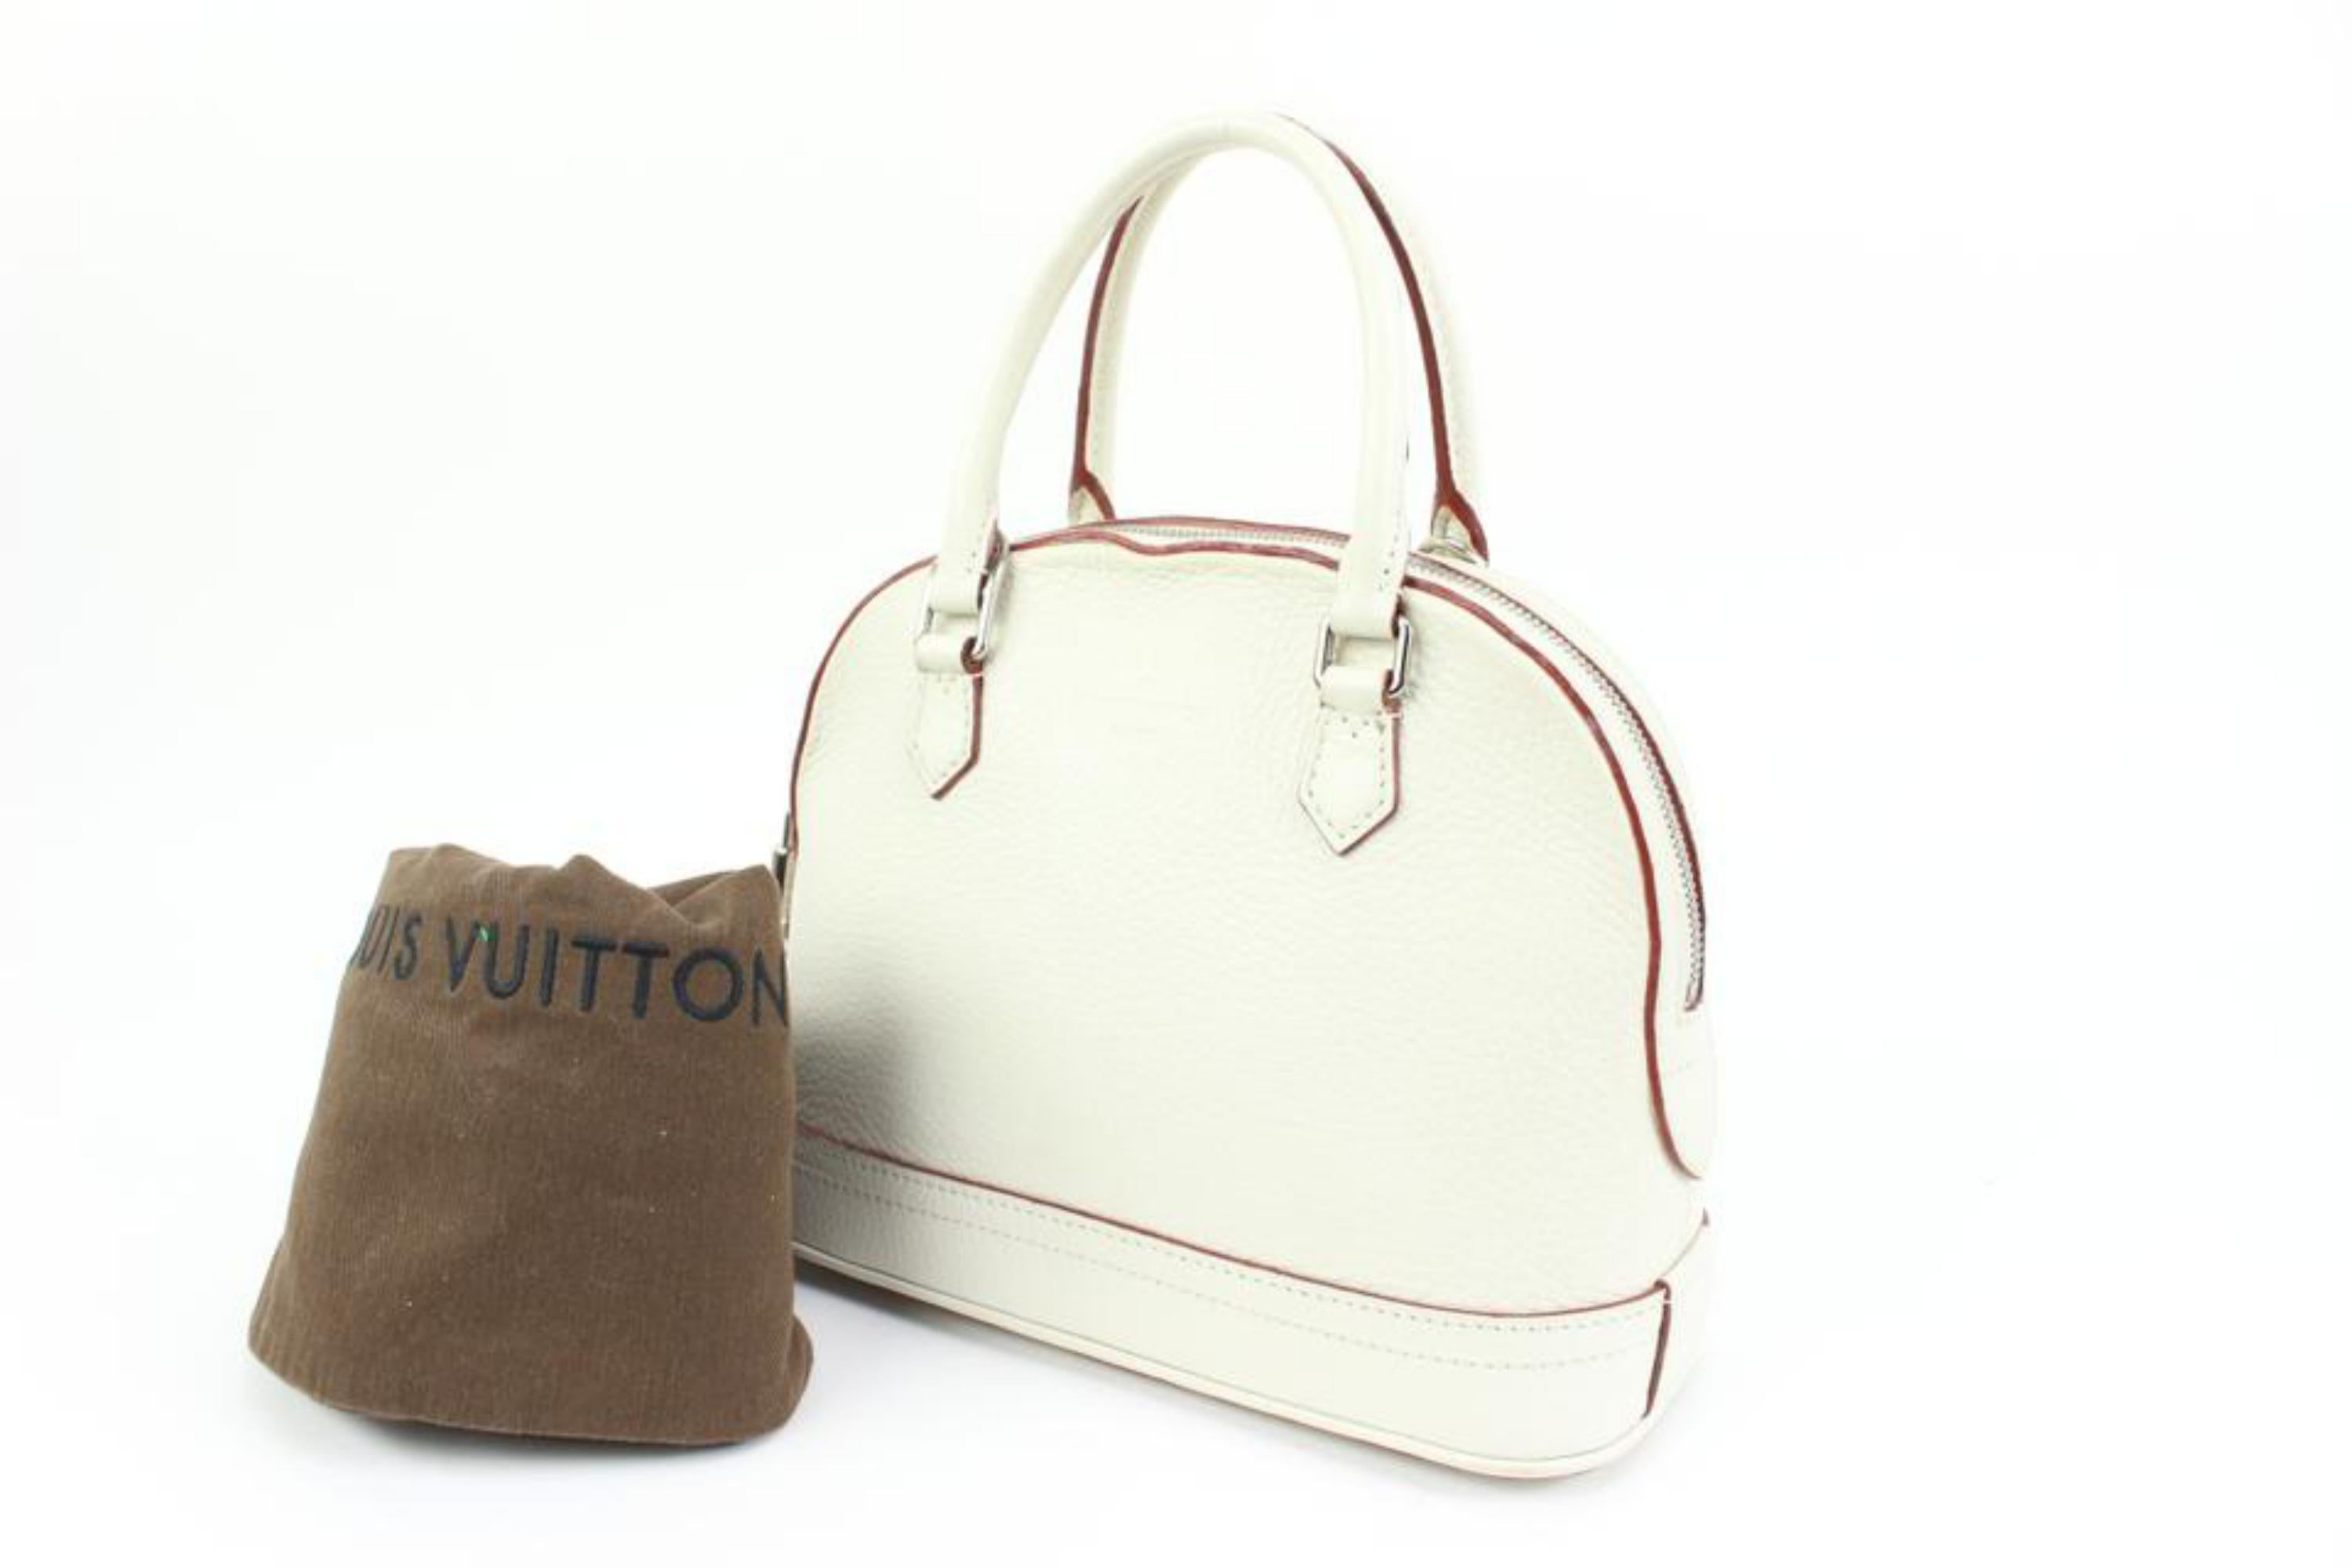 Louis Vuitton White Taurillon Leather Parnassea Alma PPM 76llk322s
Date Code/Serial Number: AR3183
Made In: France
Measurements: Length:  10